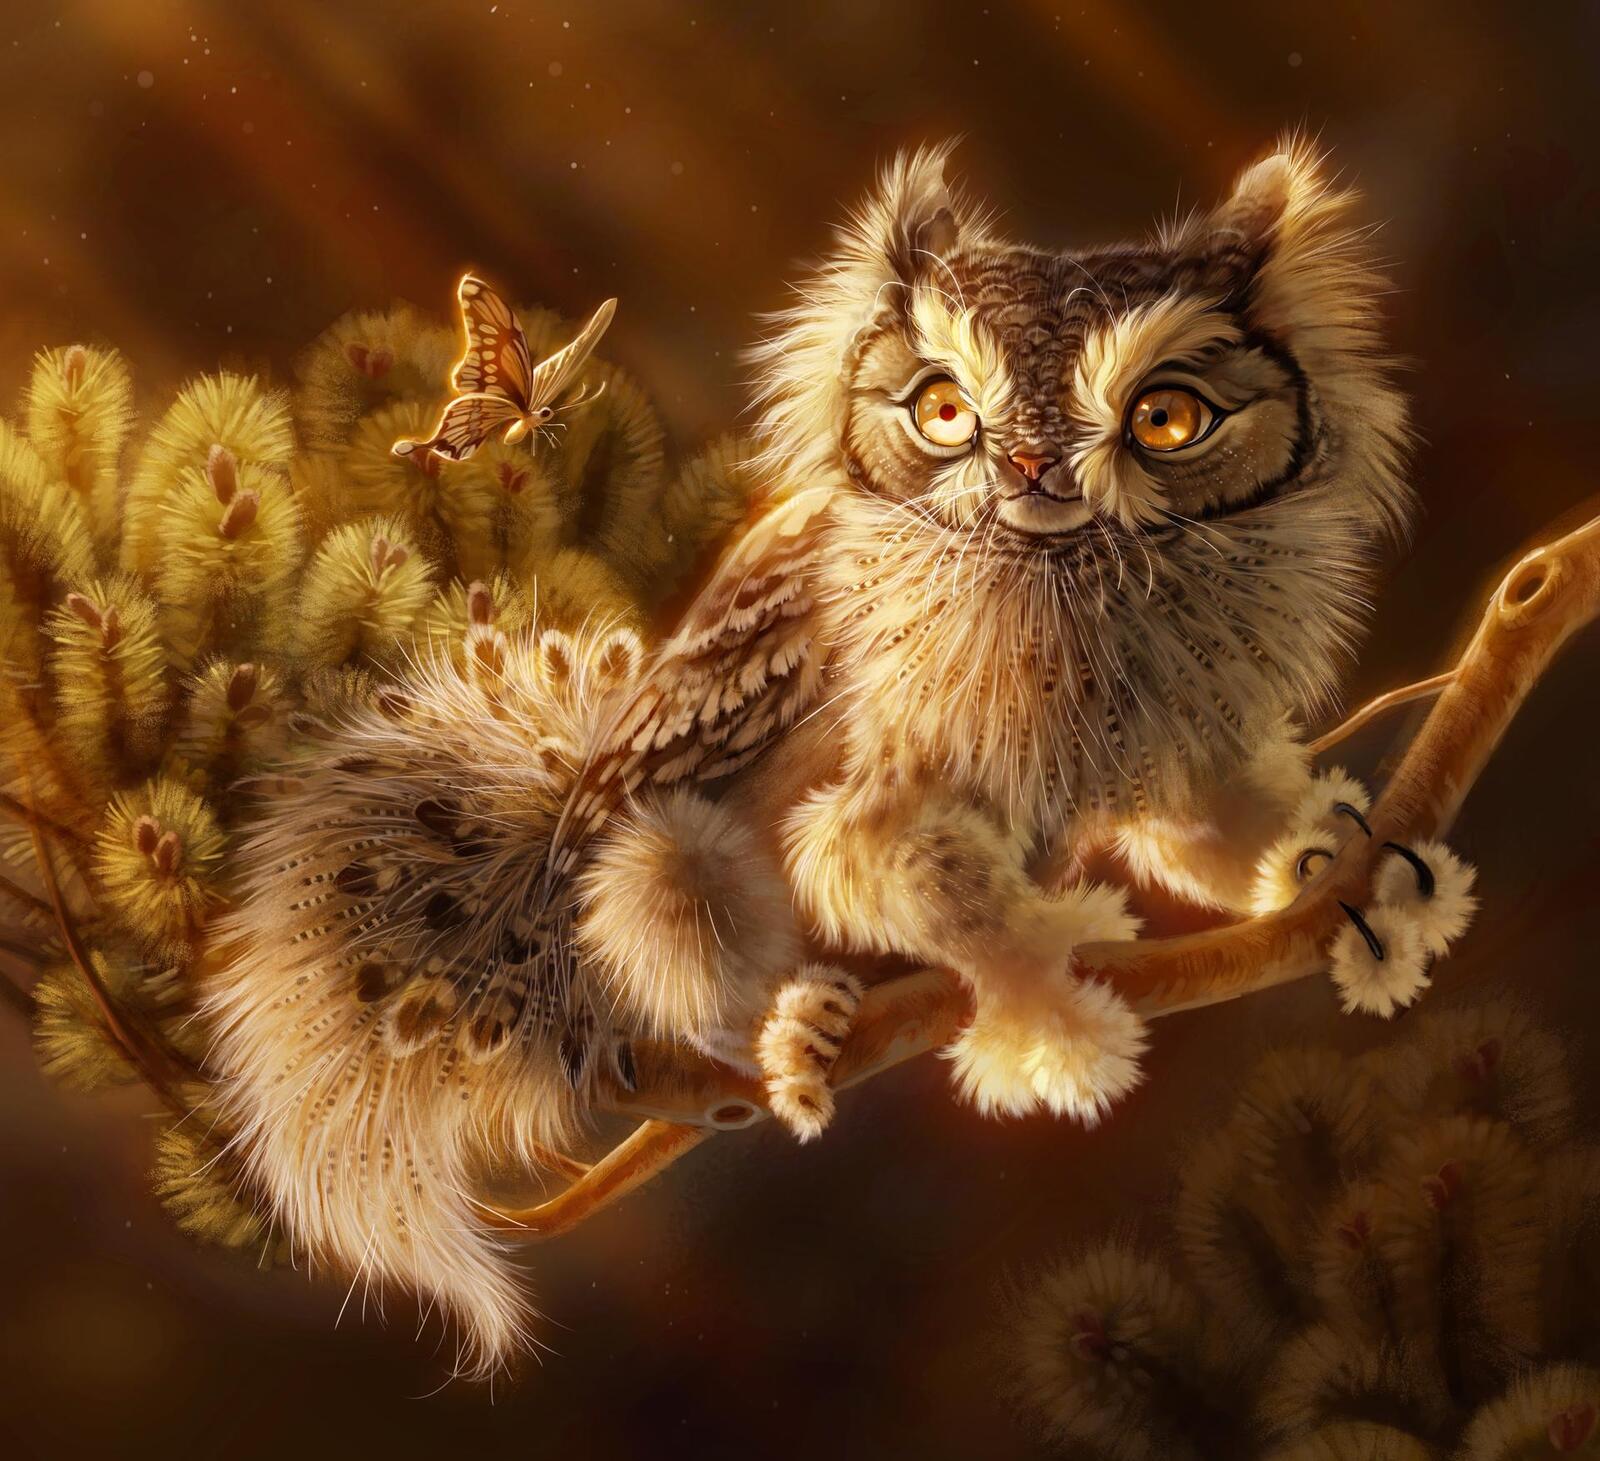 Wallpapers mythical creature owl fantastic animal drawing on the desktop